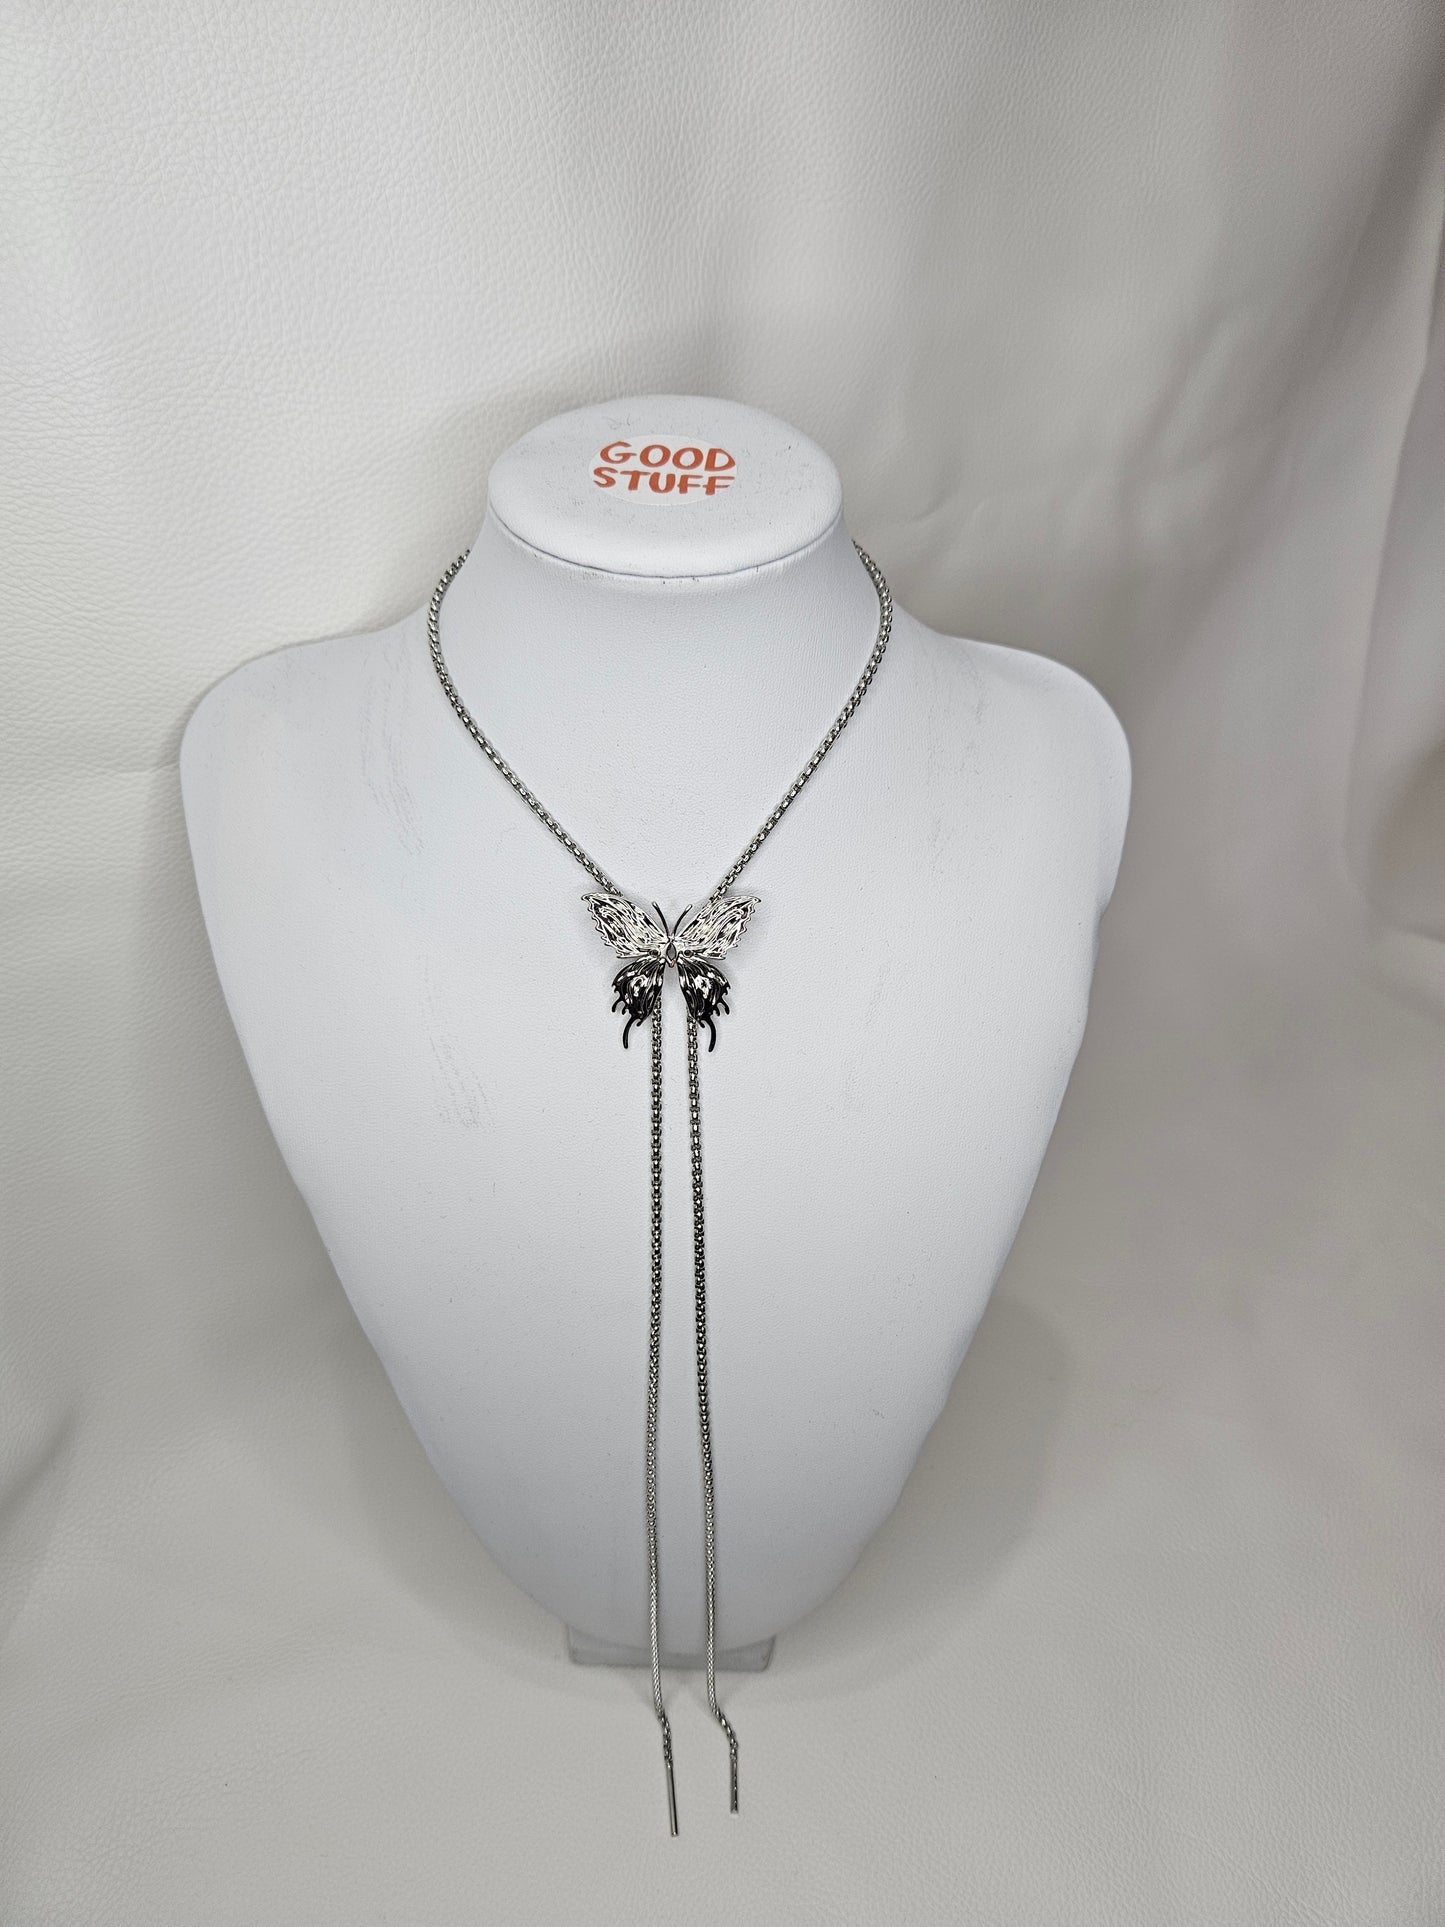 1st XULIE Butterfly 18k Platinum Plated Neck Bolo